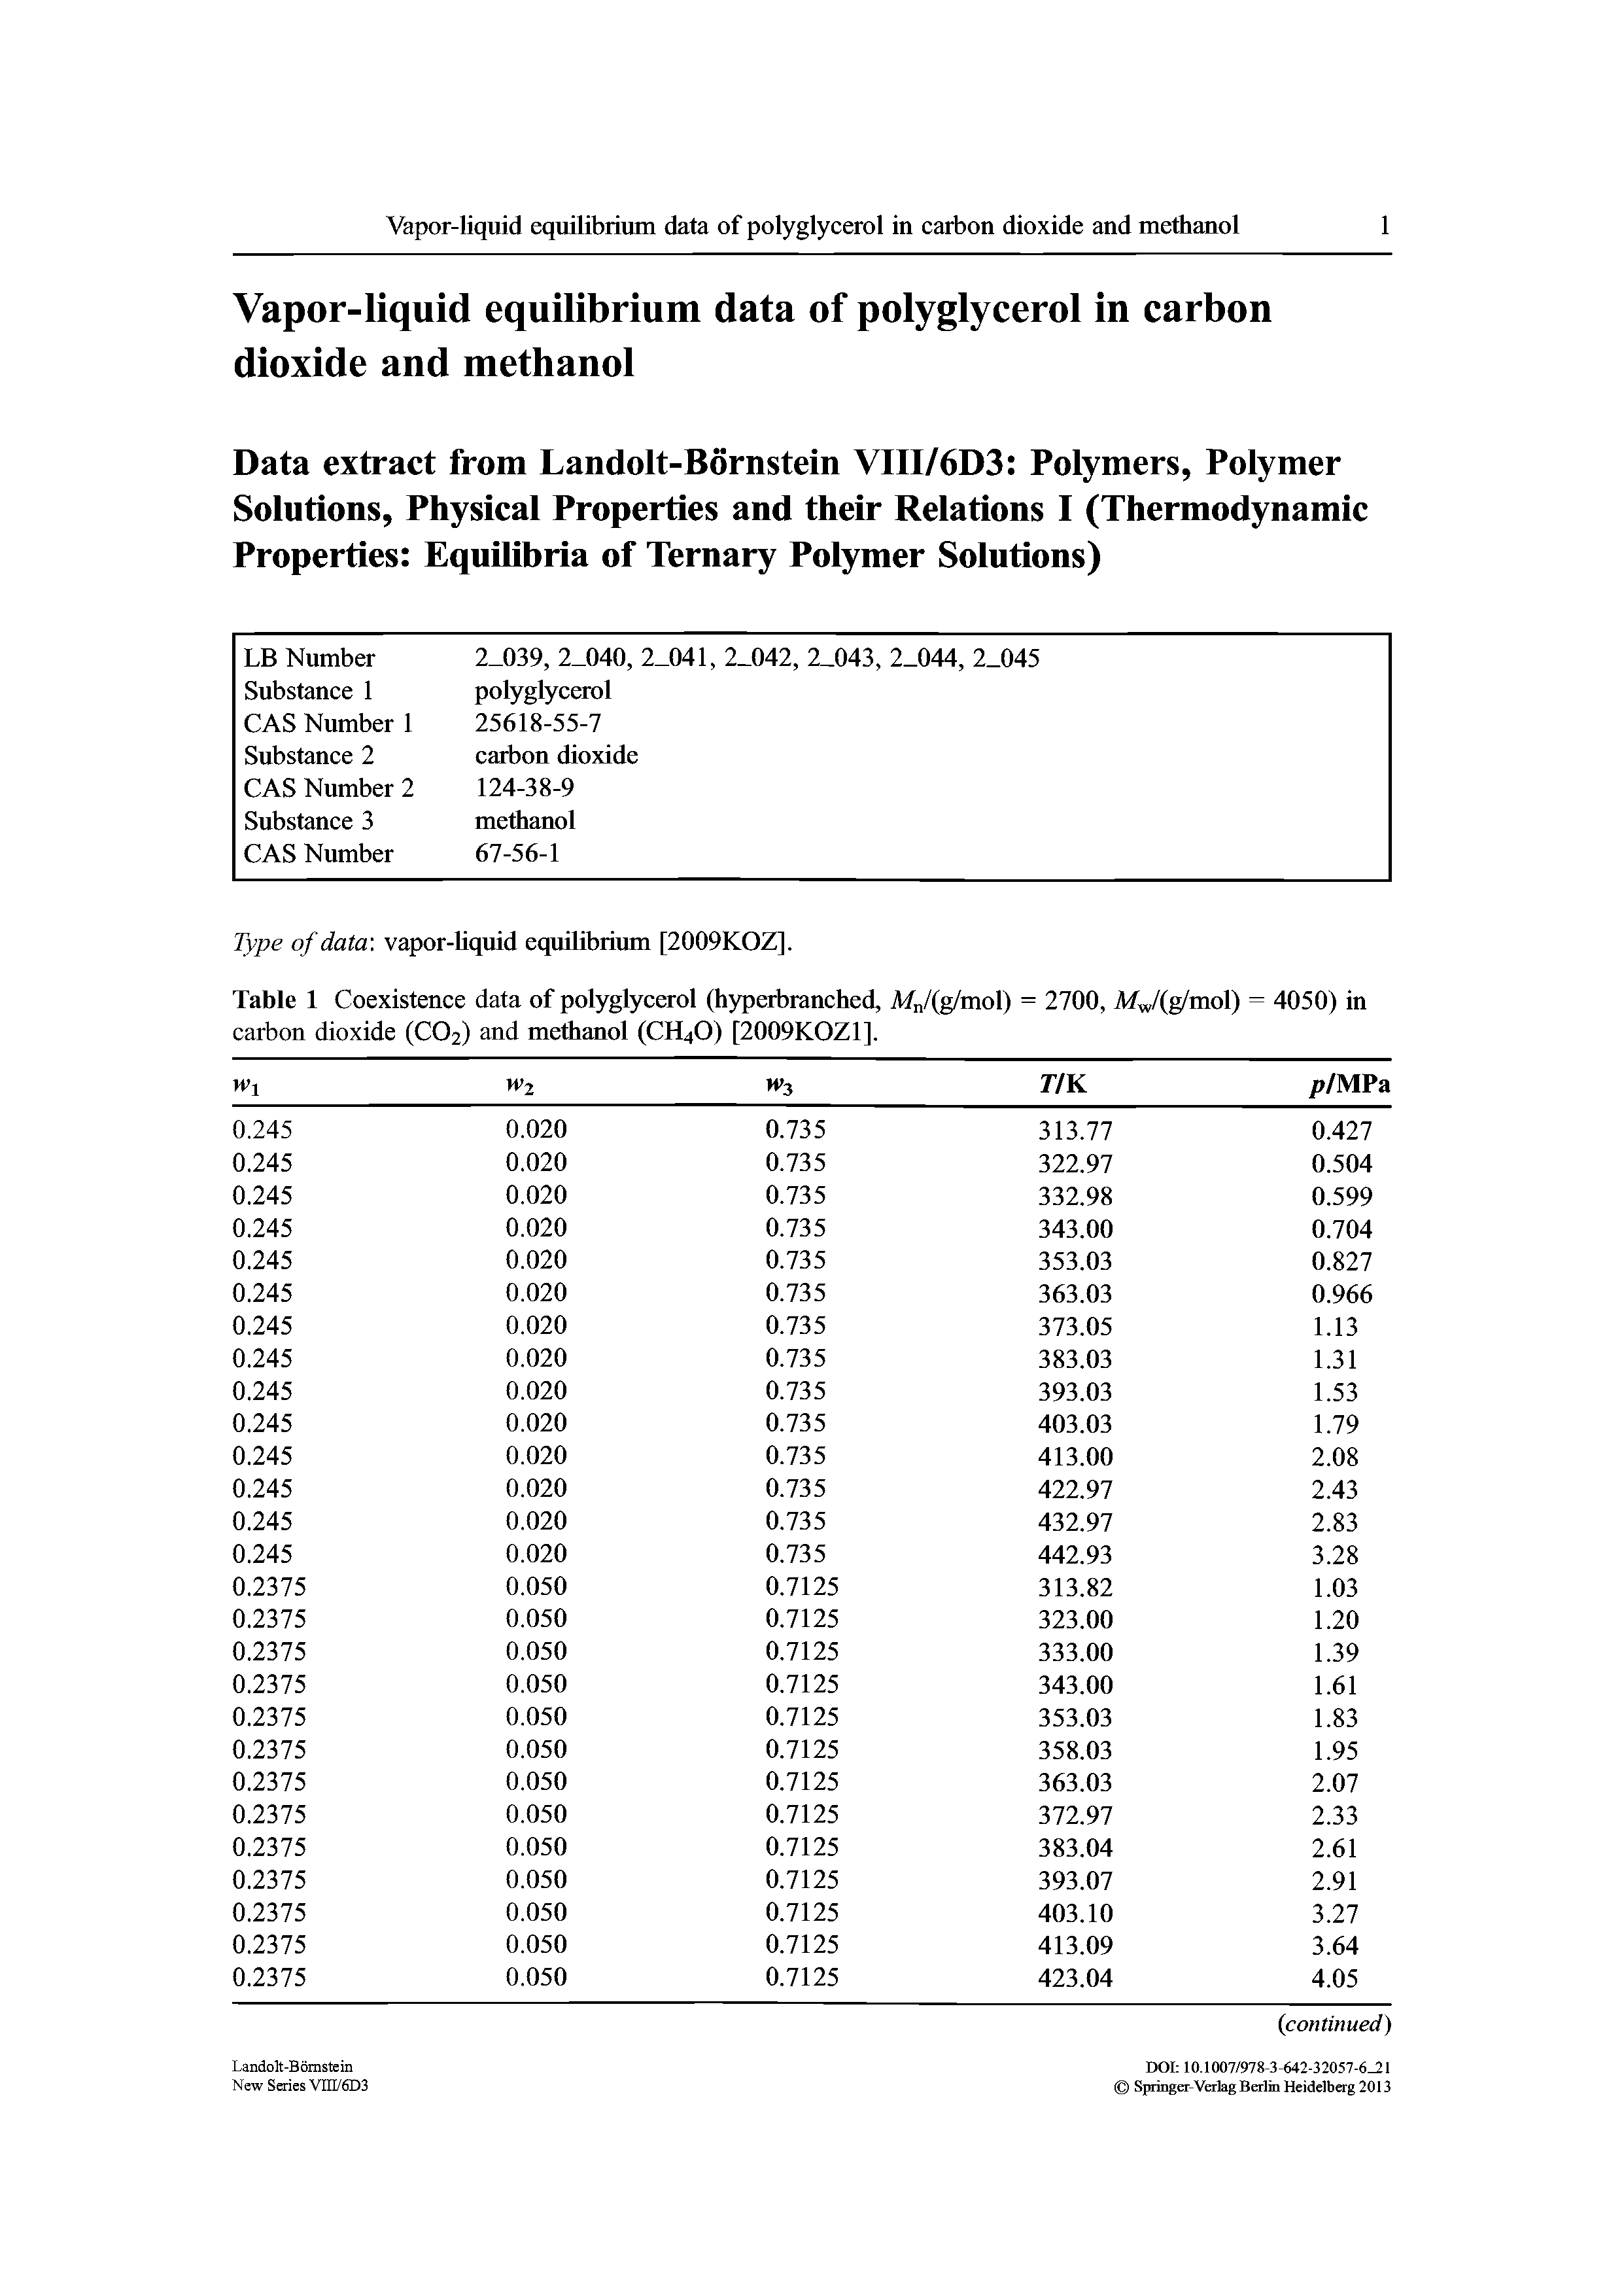 Table 1 Coexistence data of polyglycerol (hyperbranched, Mn/(g/mol) carbon dioxide (CO2) and methanol (CH4O) [2009KOZ1], = 2700, M /(g/mol) = 4050) in...